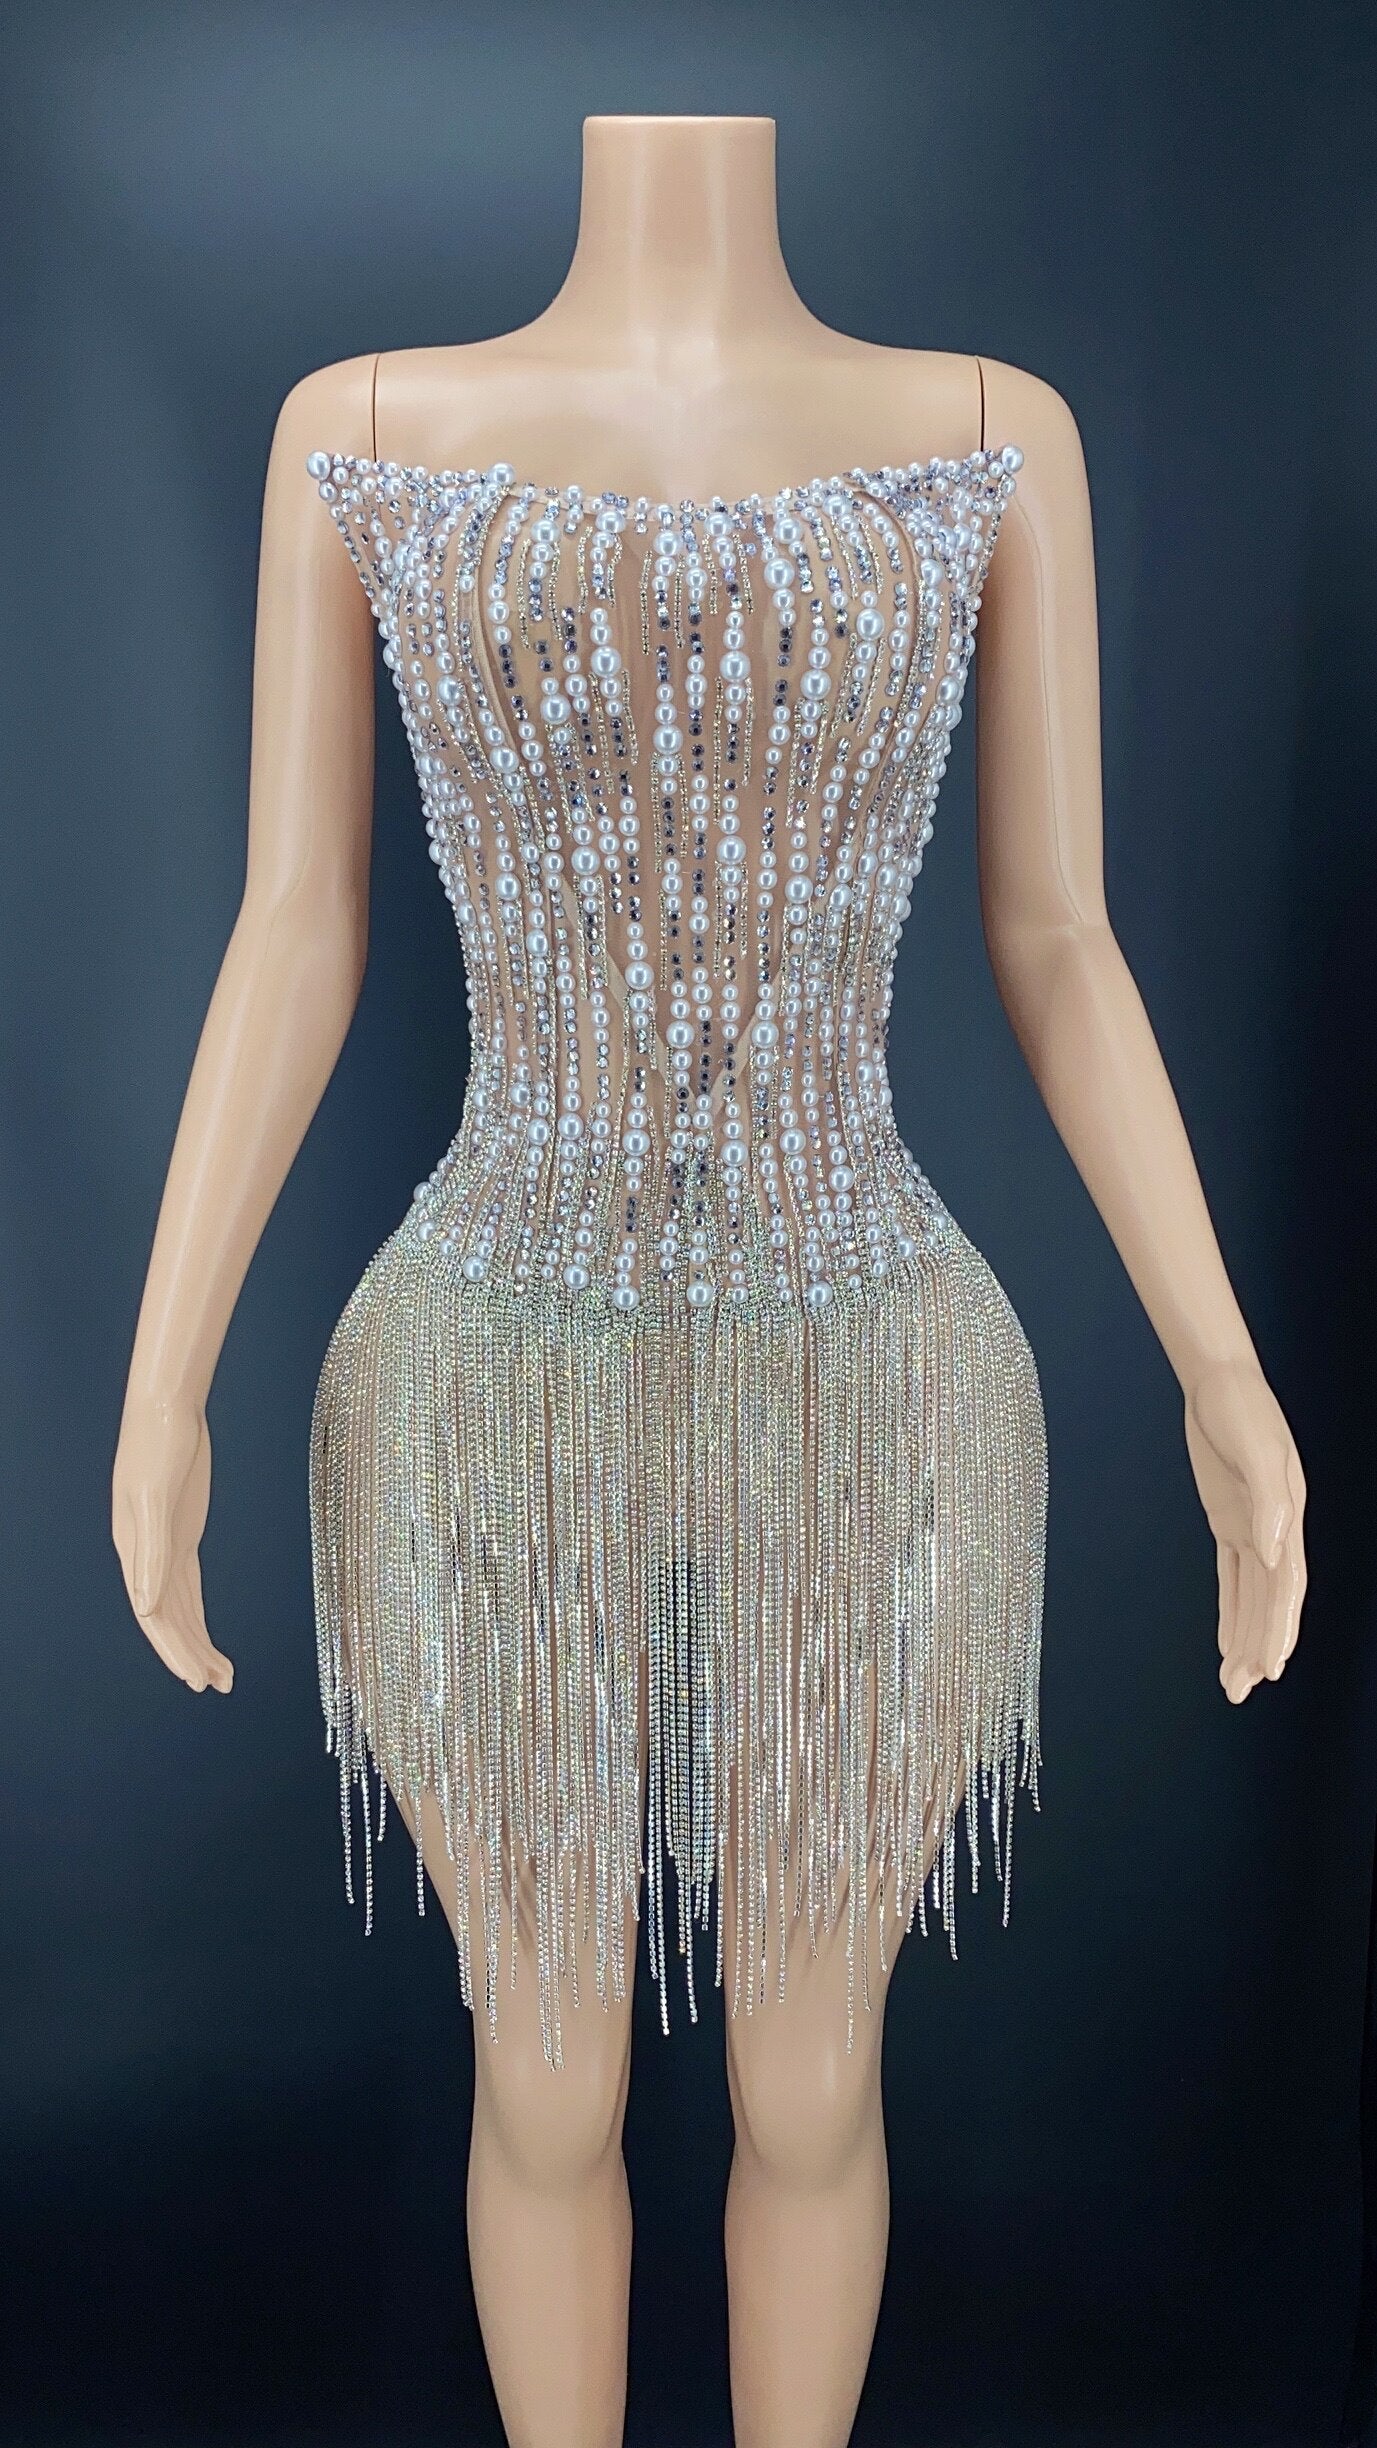 Sexy Silver Pearls Crystals Fringes Chain Transparent Corset Outfit E